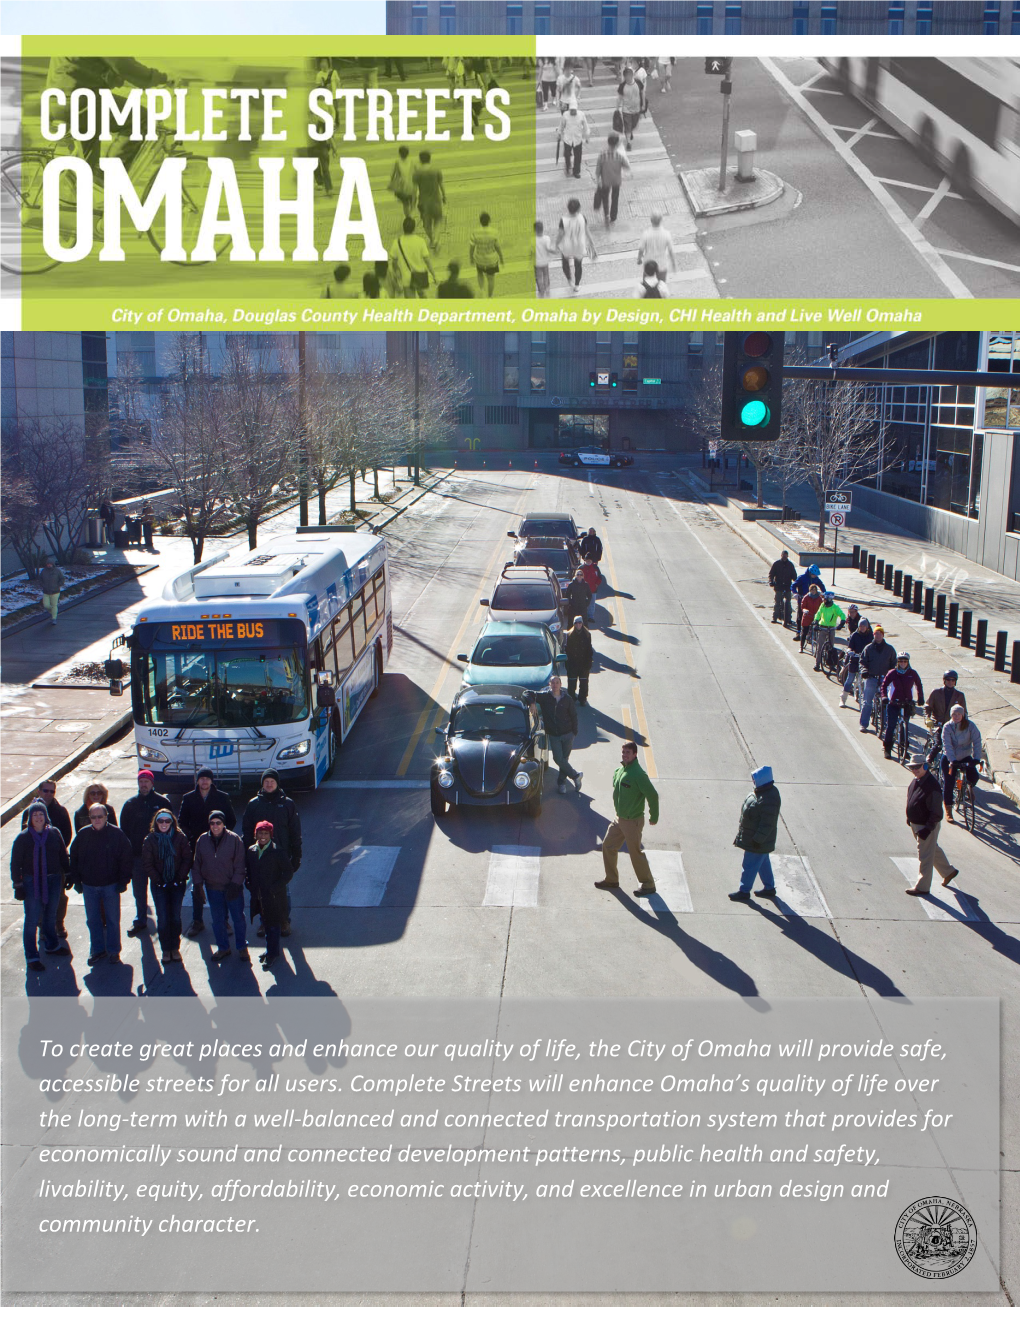 Omaha's Complete Streets Policy